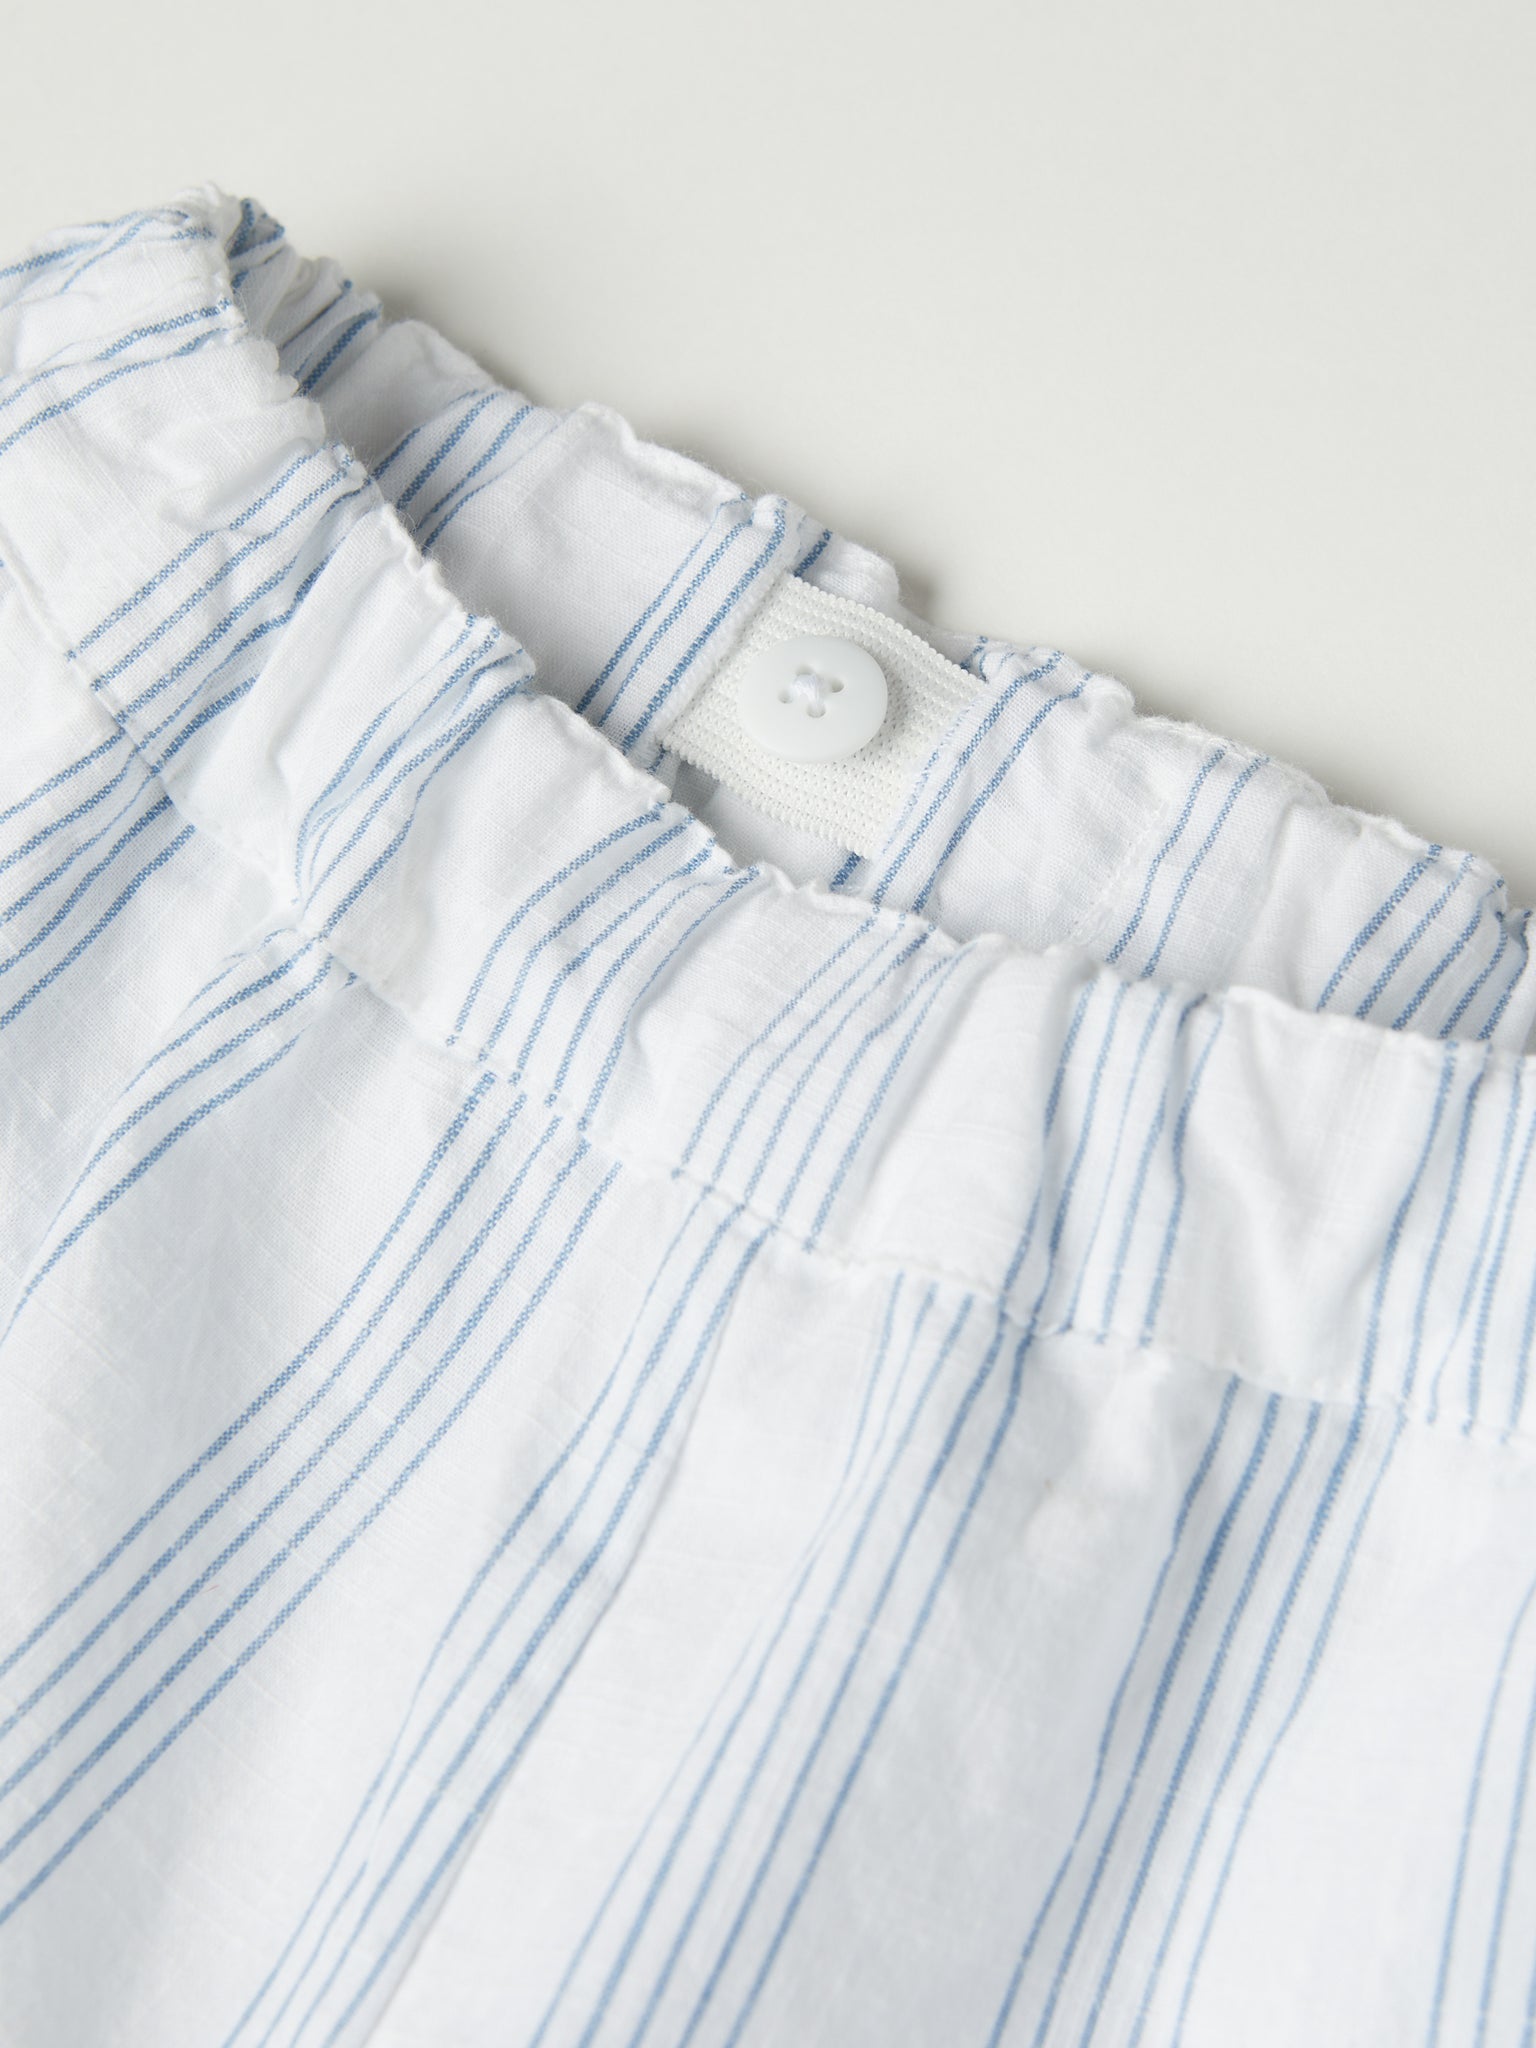 Striped Wide Leg Kids Trousers from the Polarn O. Pyret kidswear collection. Nordic kids clothes made from sustainable sources.